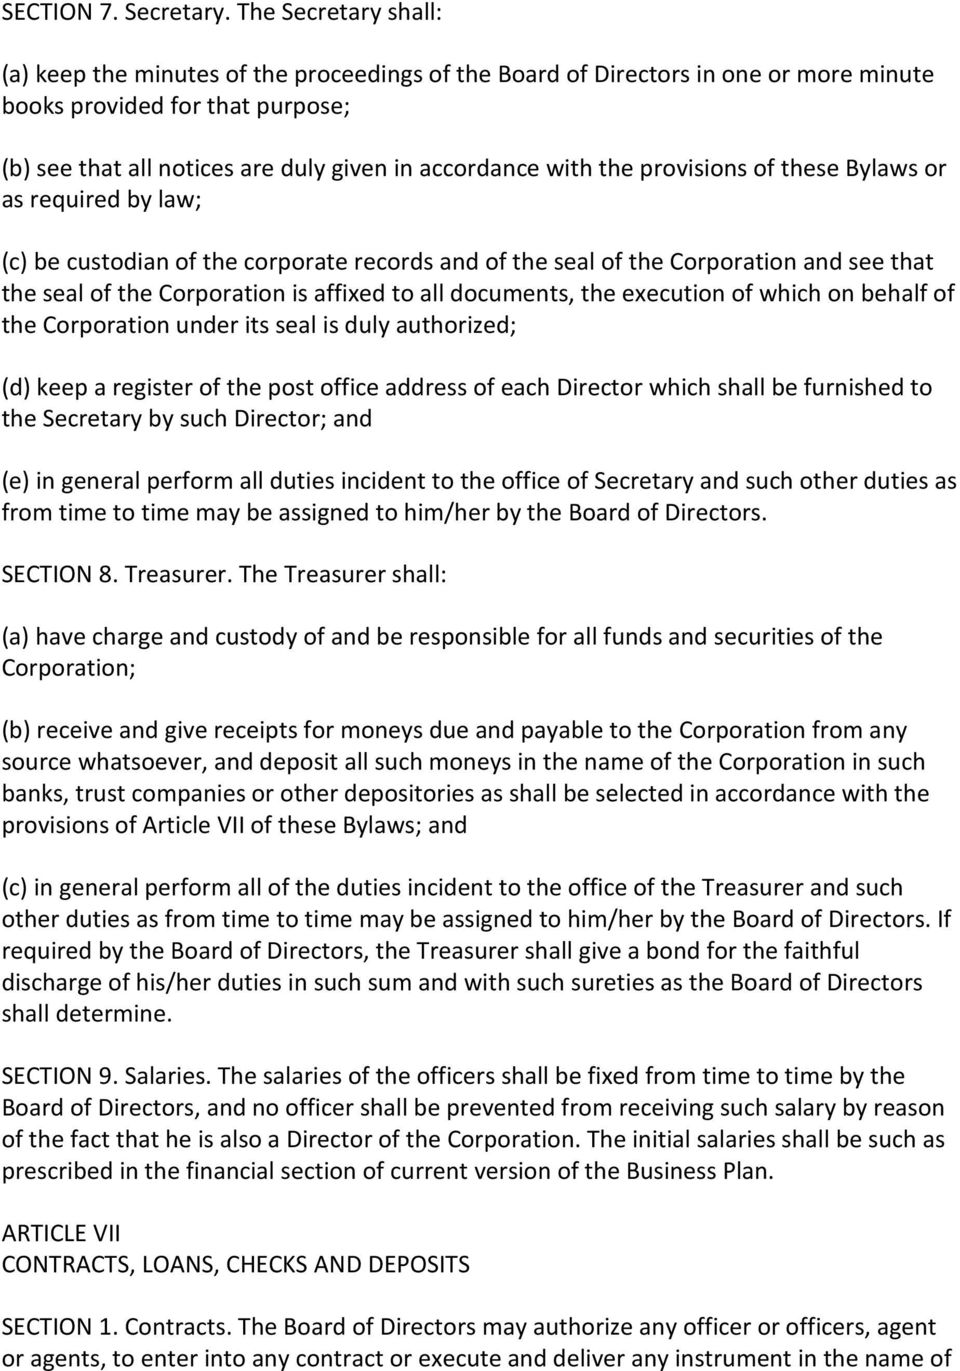 with the provisions of these Bylaws or as required by law; (c) be custodian of the corporate records and of the seal of the Corporation and see that the seal of the Corporation is affixed to all